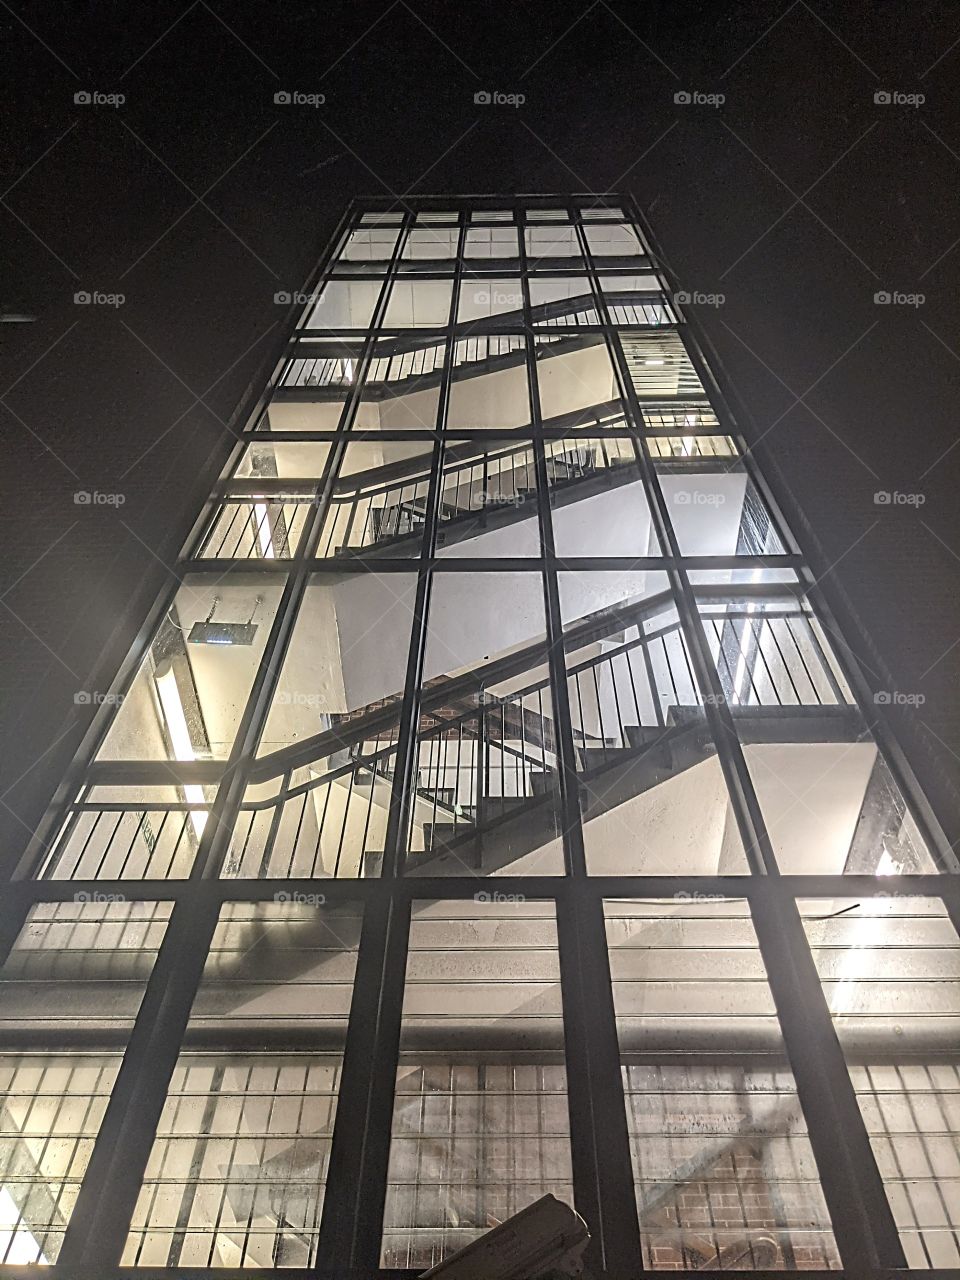 angled view of an illuminated staircase  through glass.